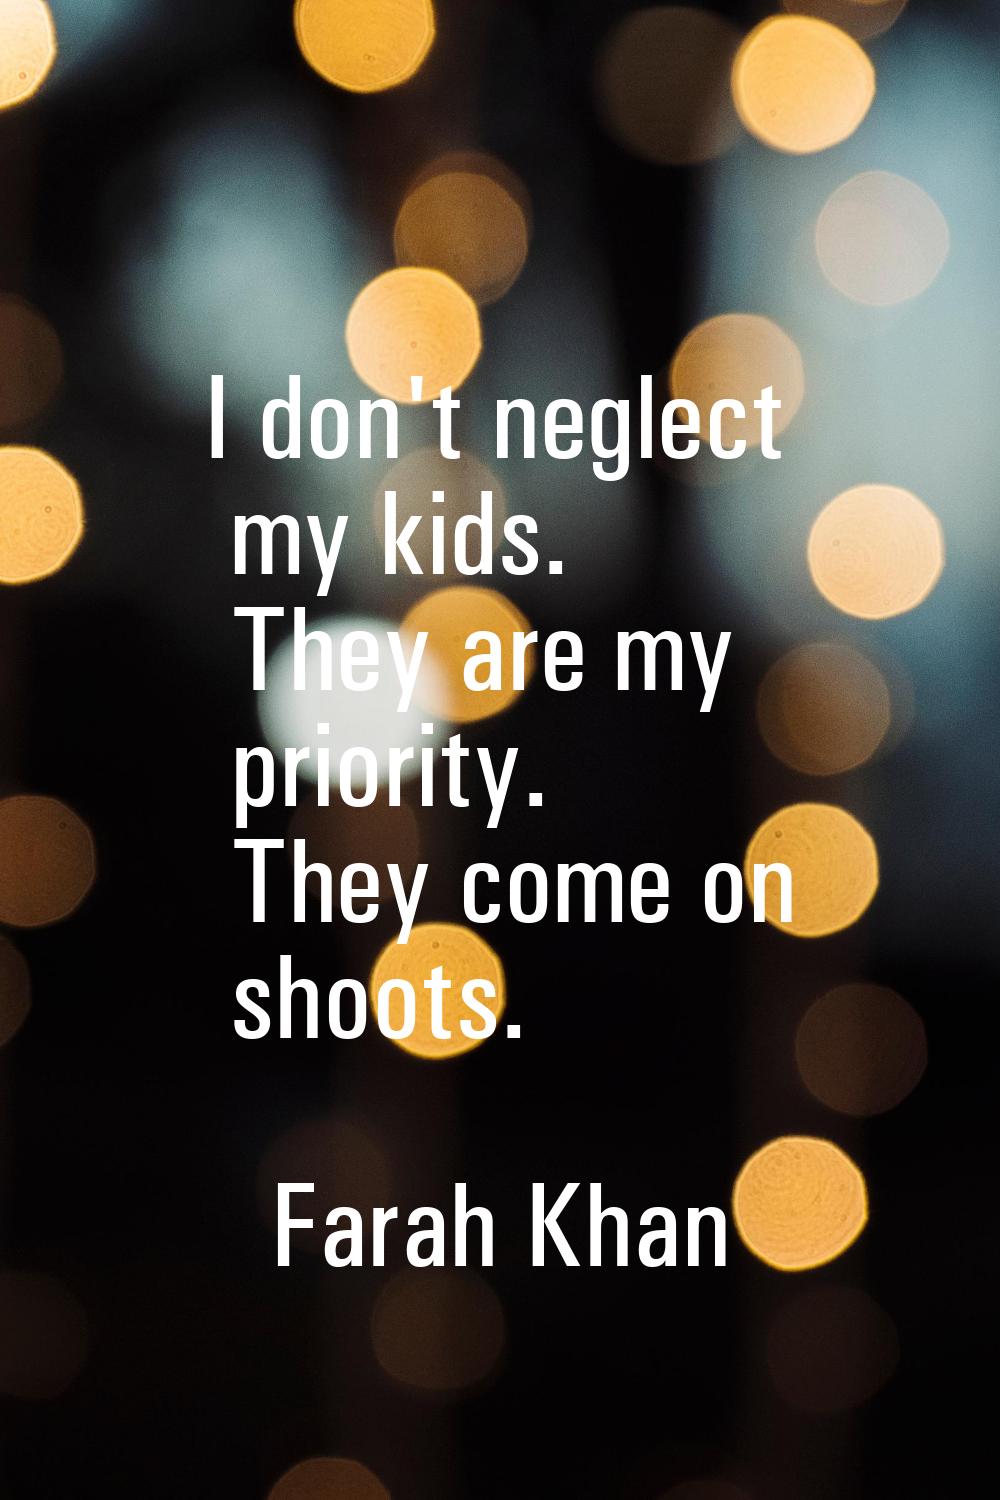 I don't neglect my kids. They are my priority. They come on shoots.